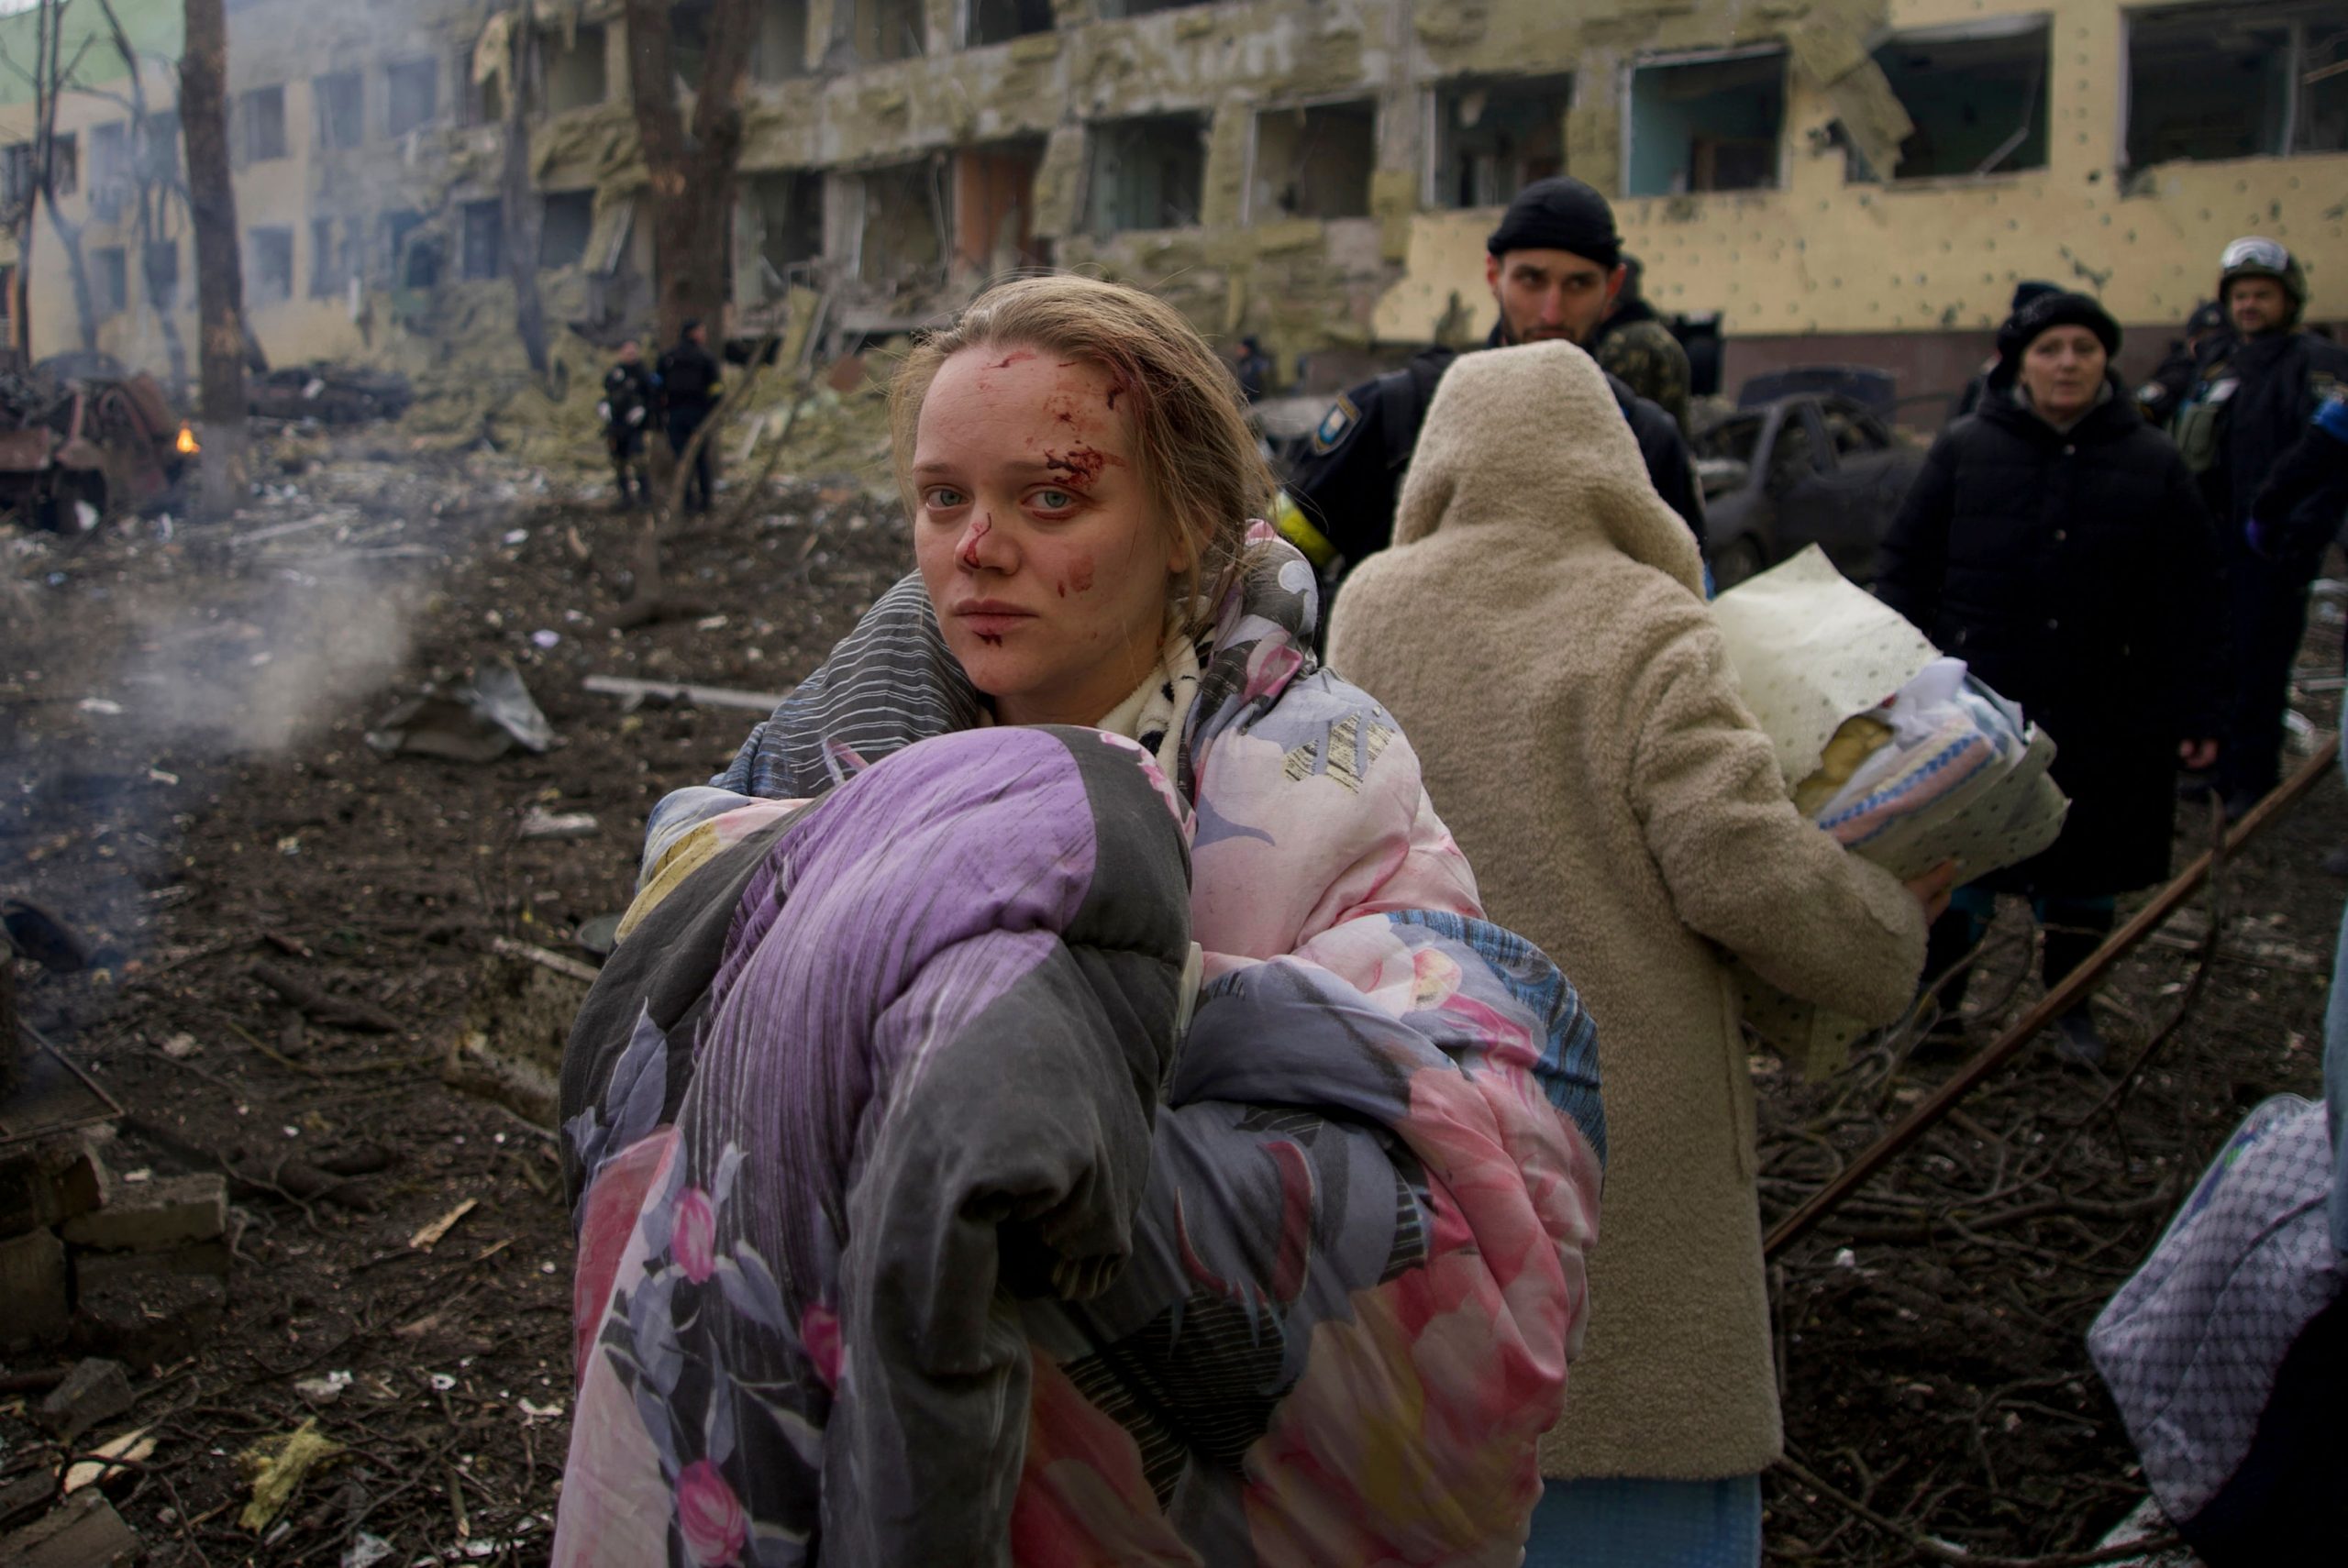 Mariupol in the ‘hands of occupiers’, mayor calls for complete evacuation